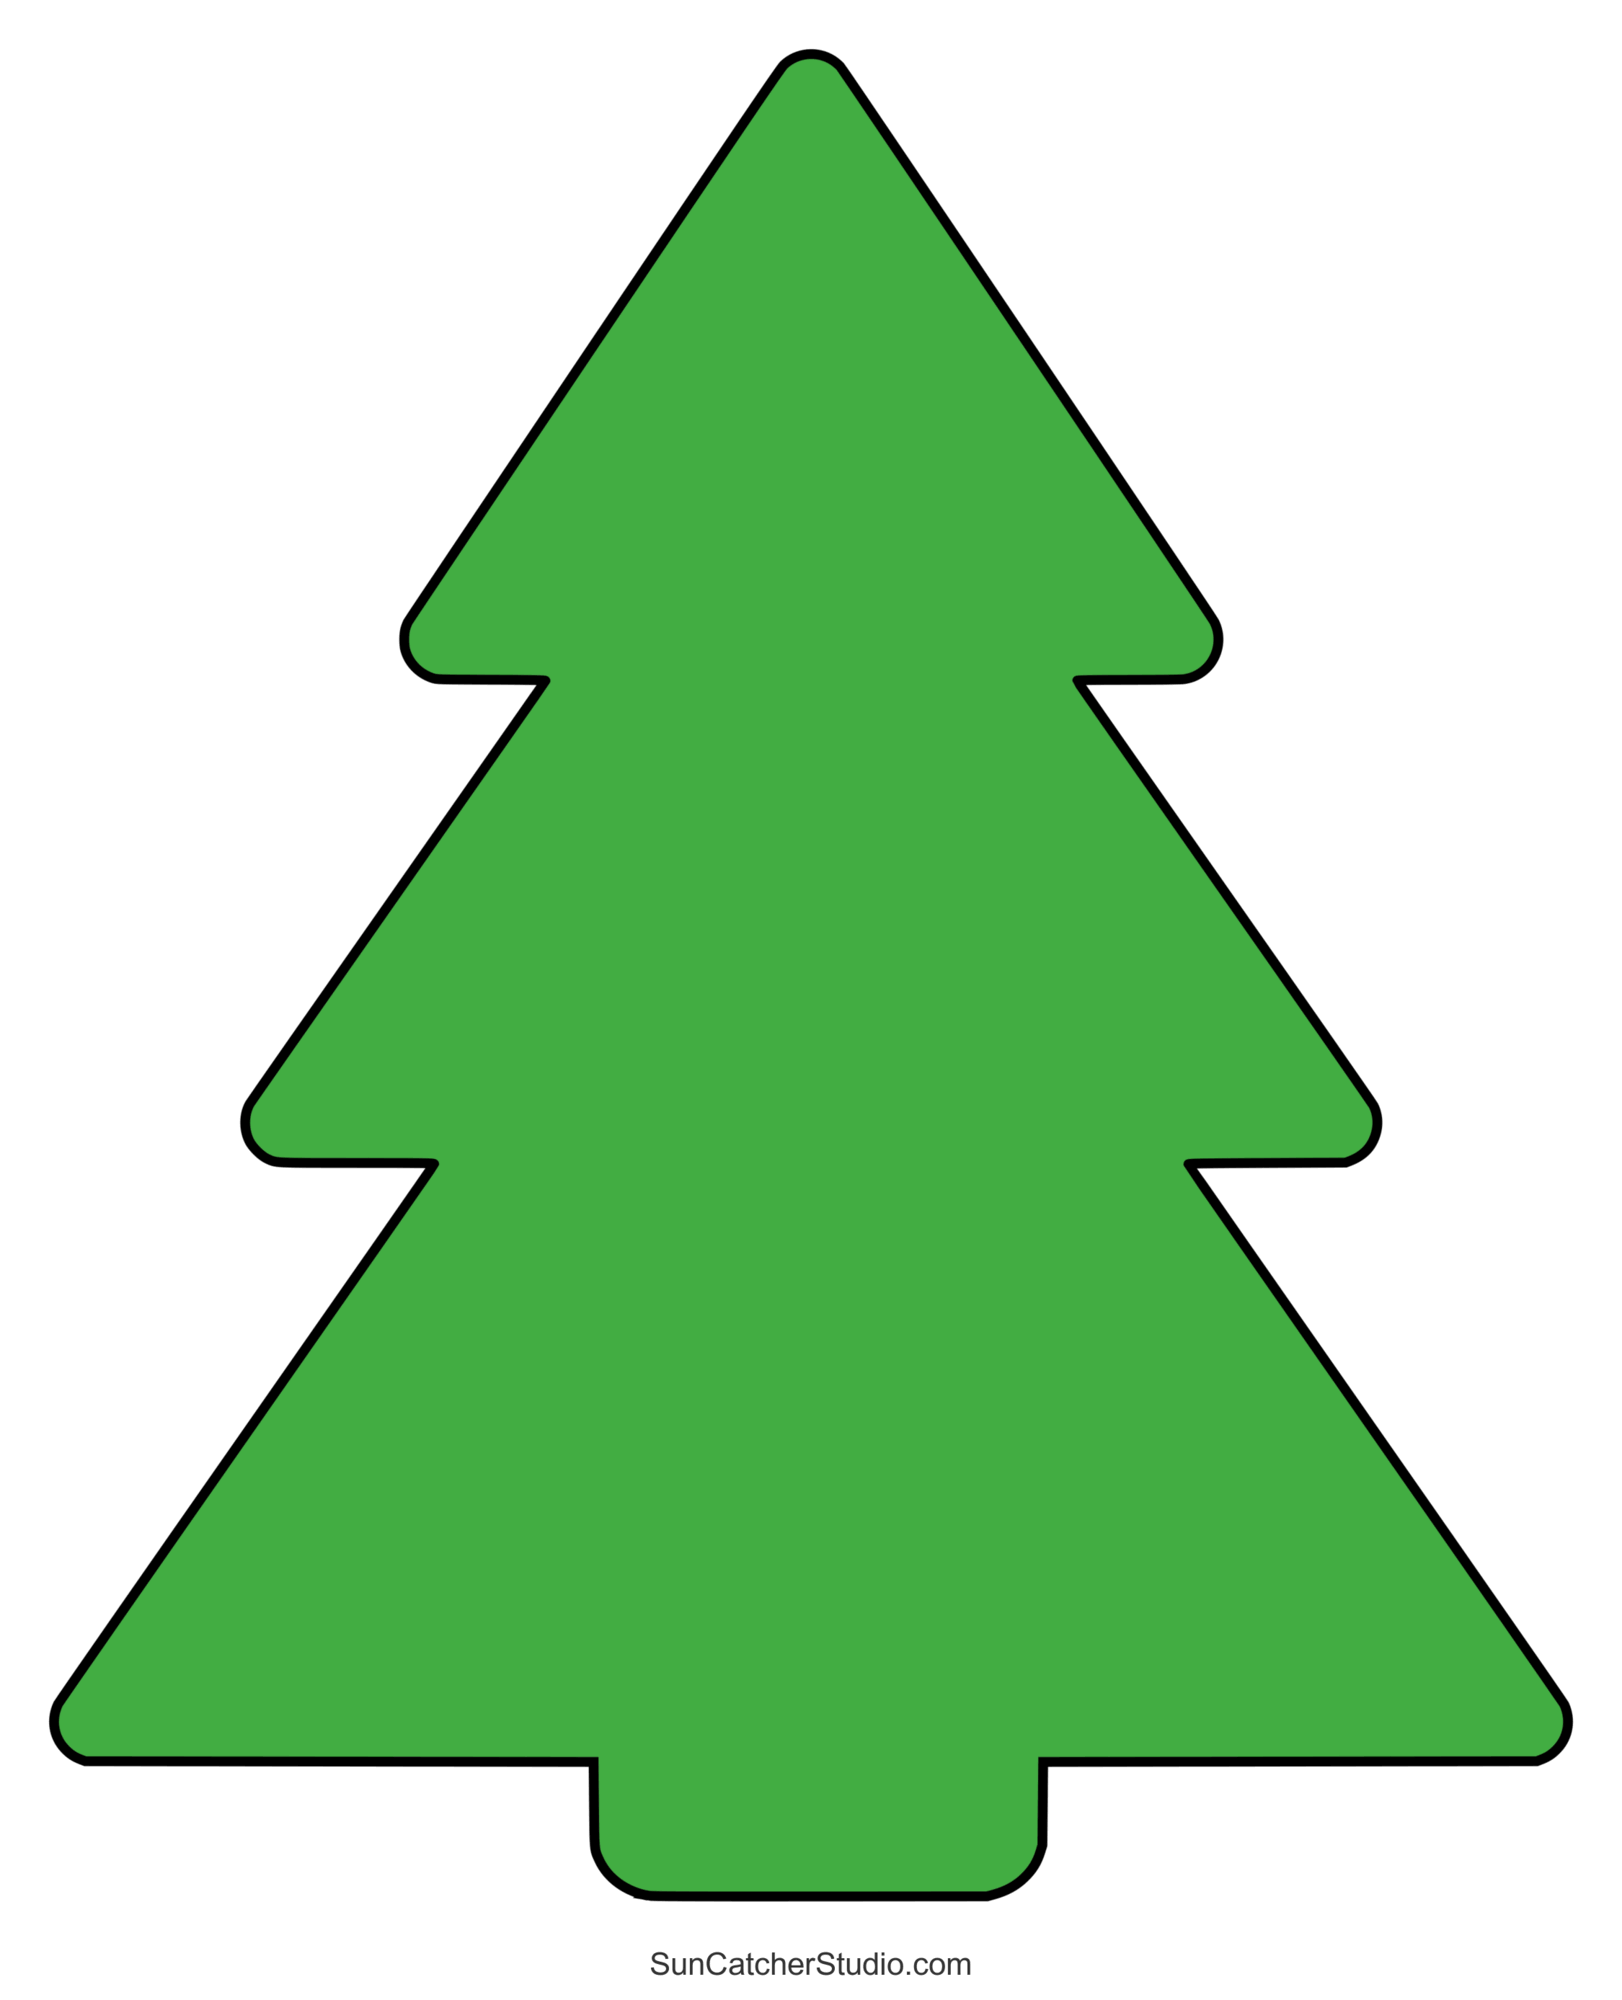 Christmas tree templates and stencils free printable patterns â diy projects patterns monograms designs templates